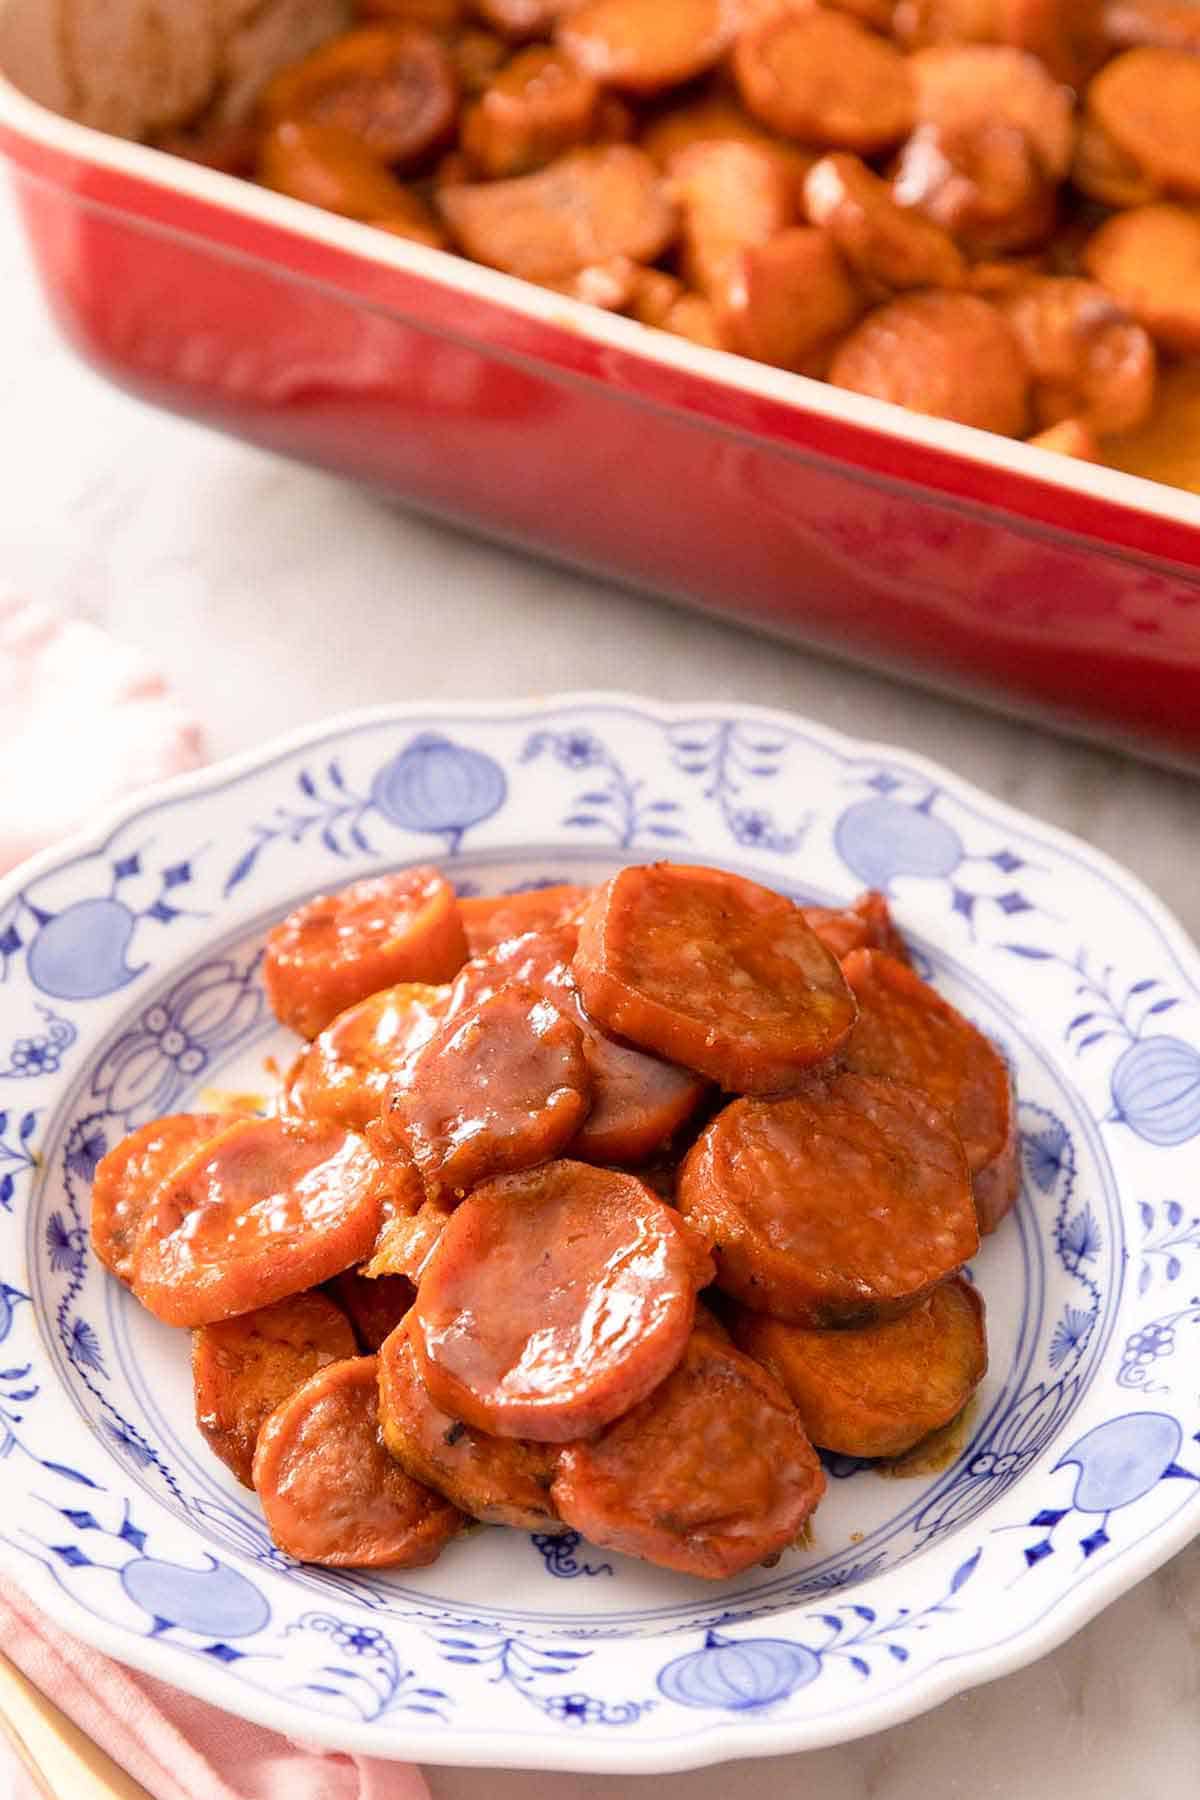 A plate with a serving of candied yams. Red baking dish with the rest in the background.